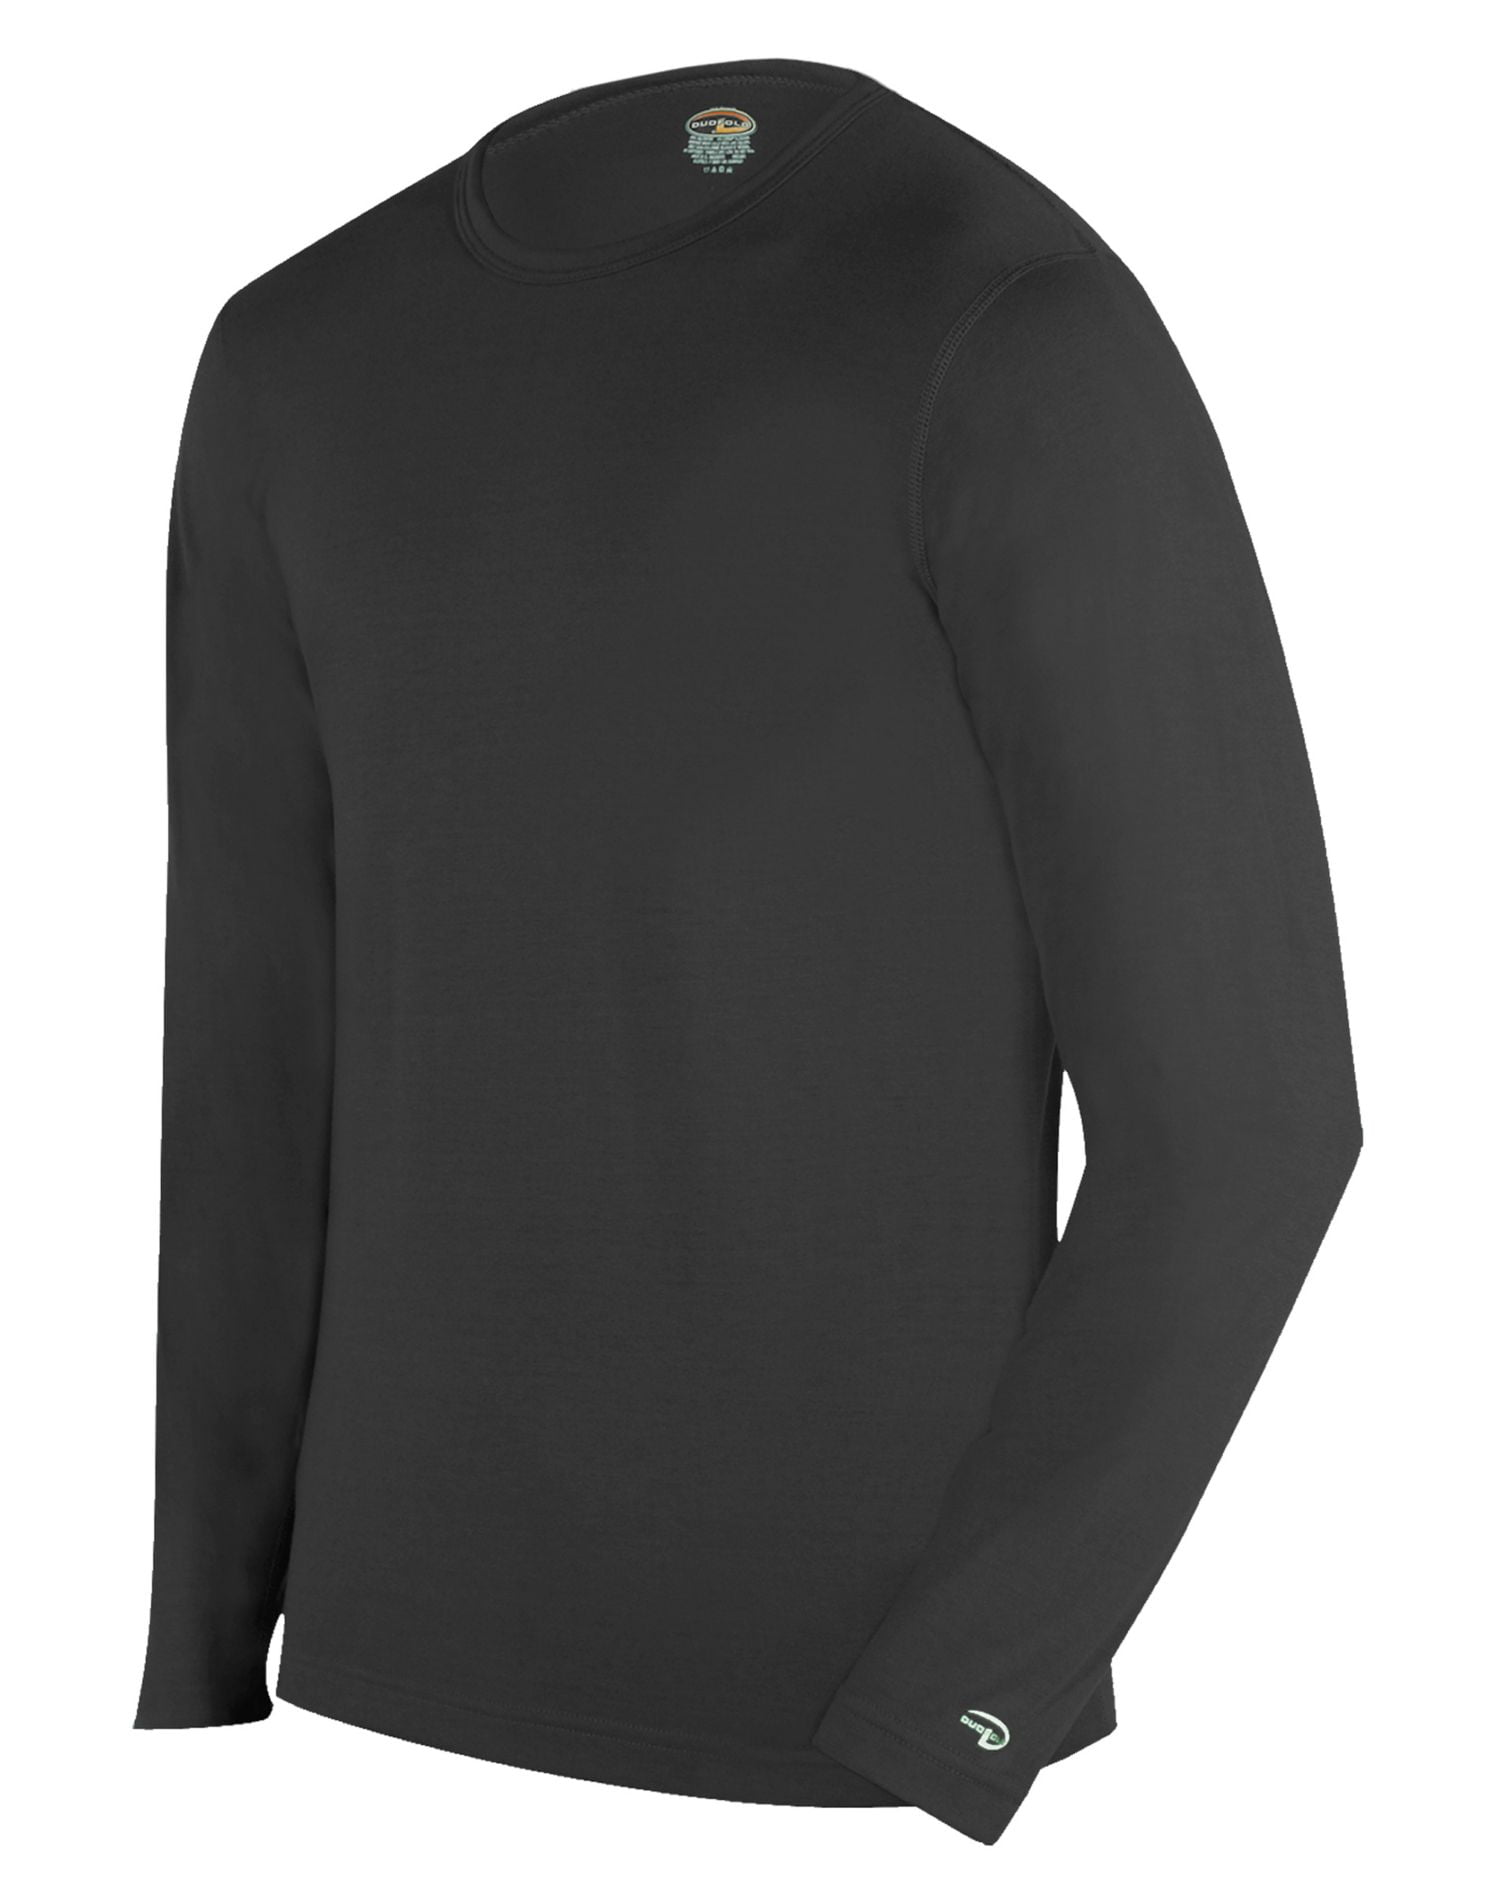 Duofold by Champion® Men's Varitherm Midweight Baselayer Thermal Pants -  Simpson Advanced Chiropractic & Medical Center